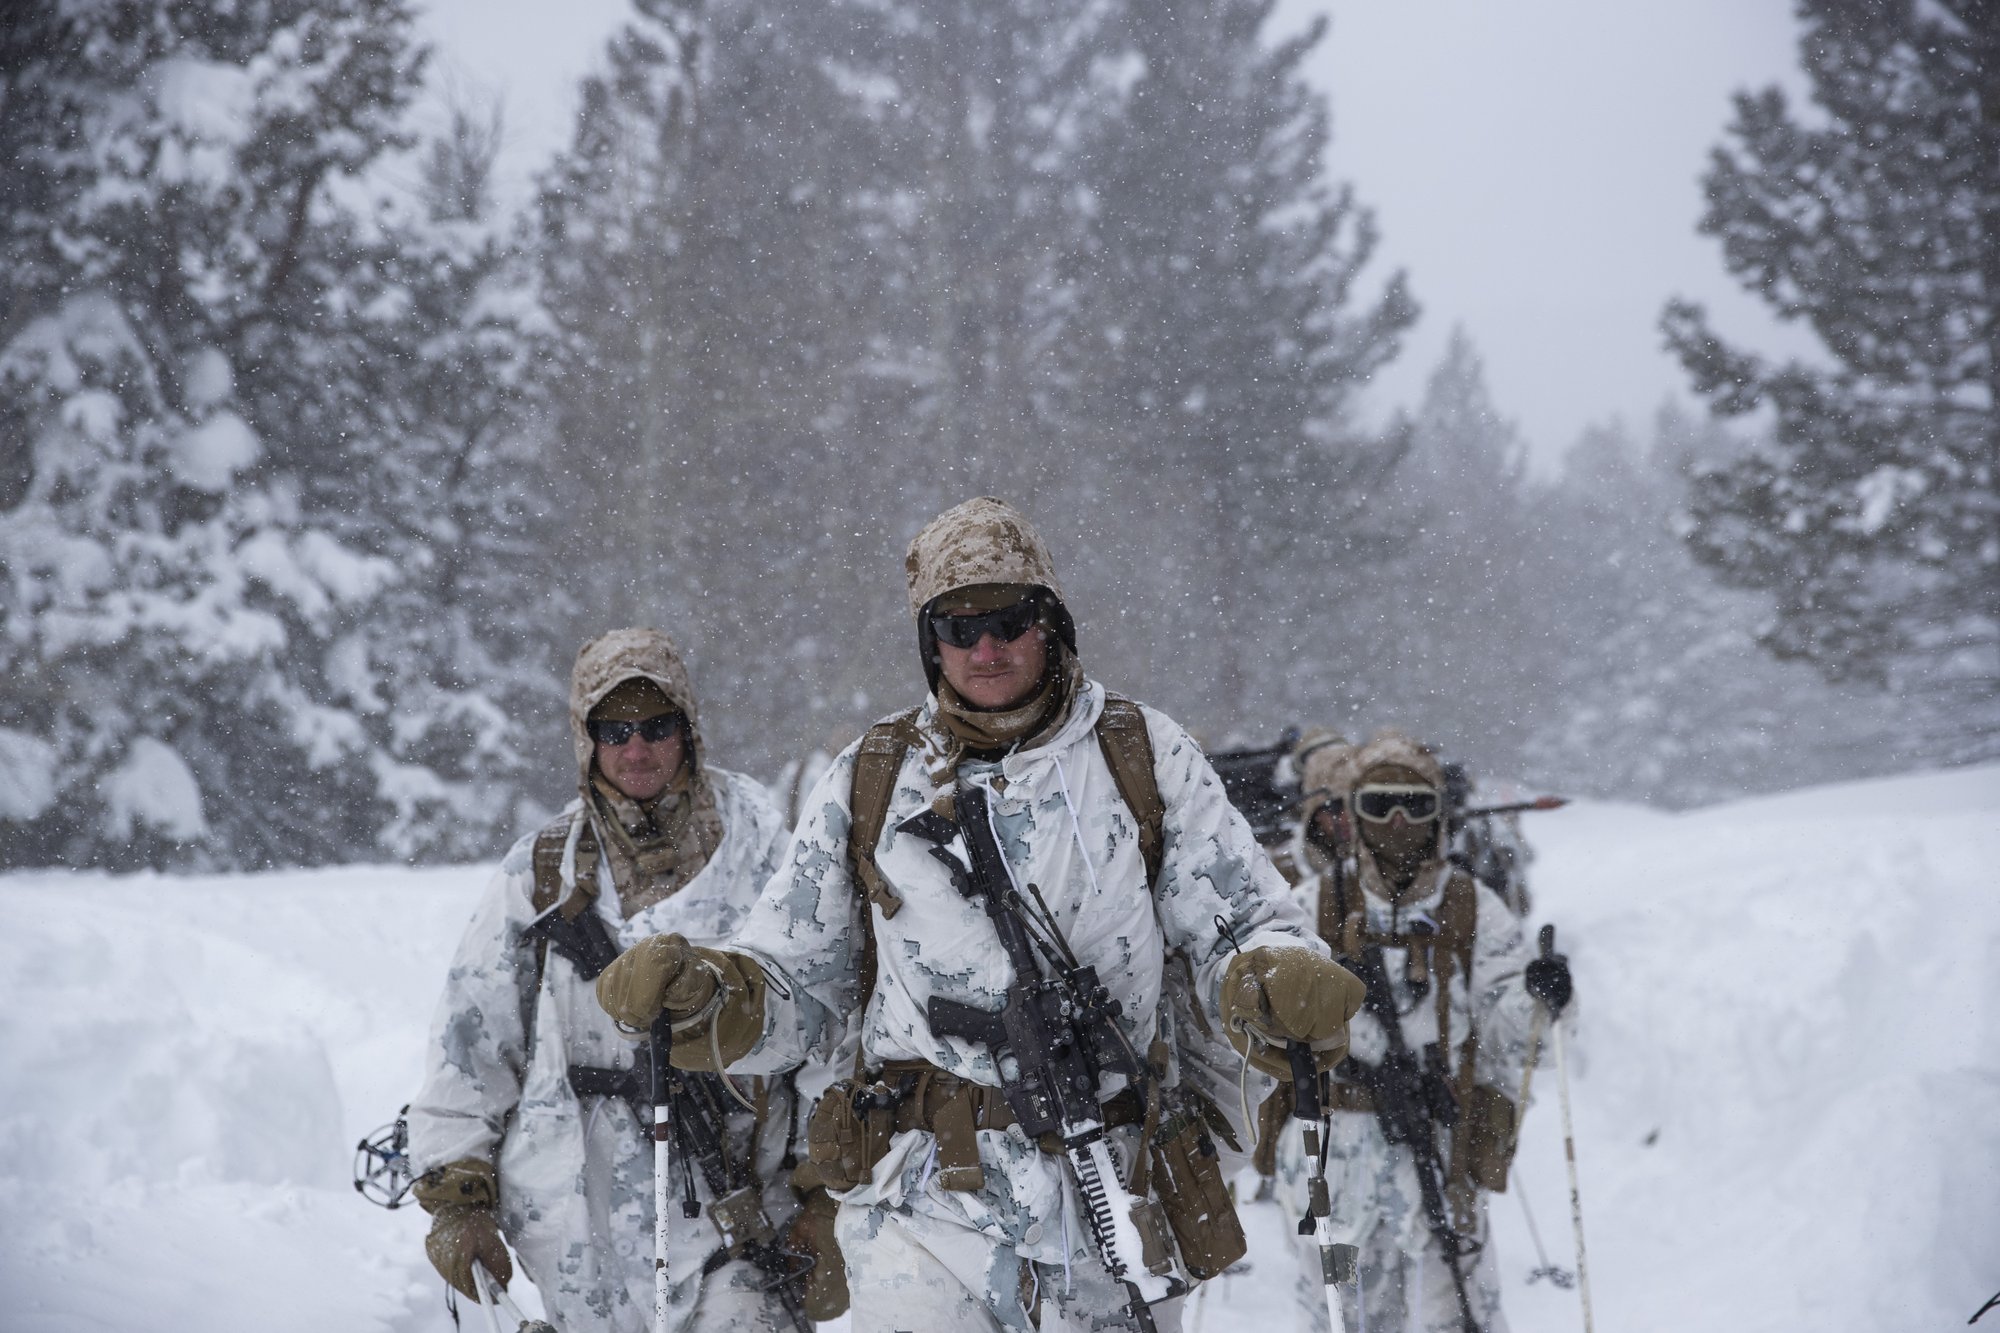 U.S. Marines walk along a snow-covered trail during their advanced cold-weather training at the Marine Corps Mountain Warfare Training Center Sunday, Feb. 10, 2019, in Bridgeport, Calif. After 17 years of war against Taliban and al-Qaida-linked insurgents, the military is shifting its focus to better prepare for great-power competition with Russia and China, and against unpredictable foes such as North Korea and Iran. (AP Photo/Jae C. Hong)